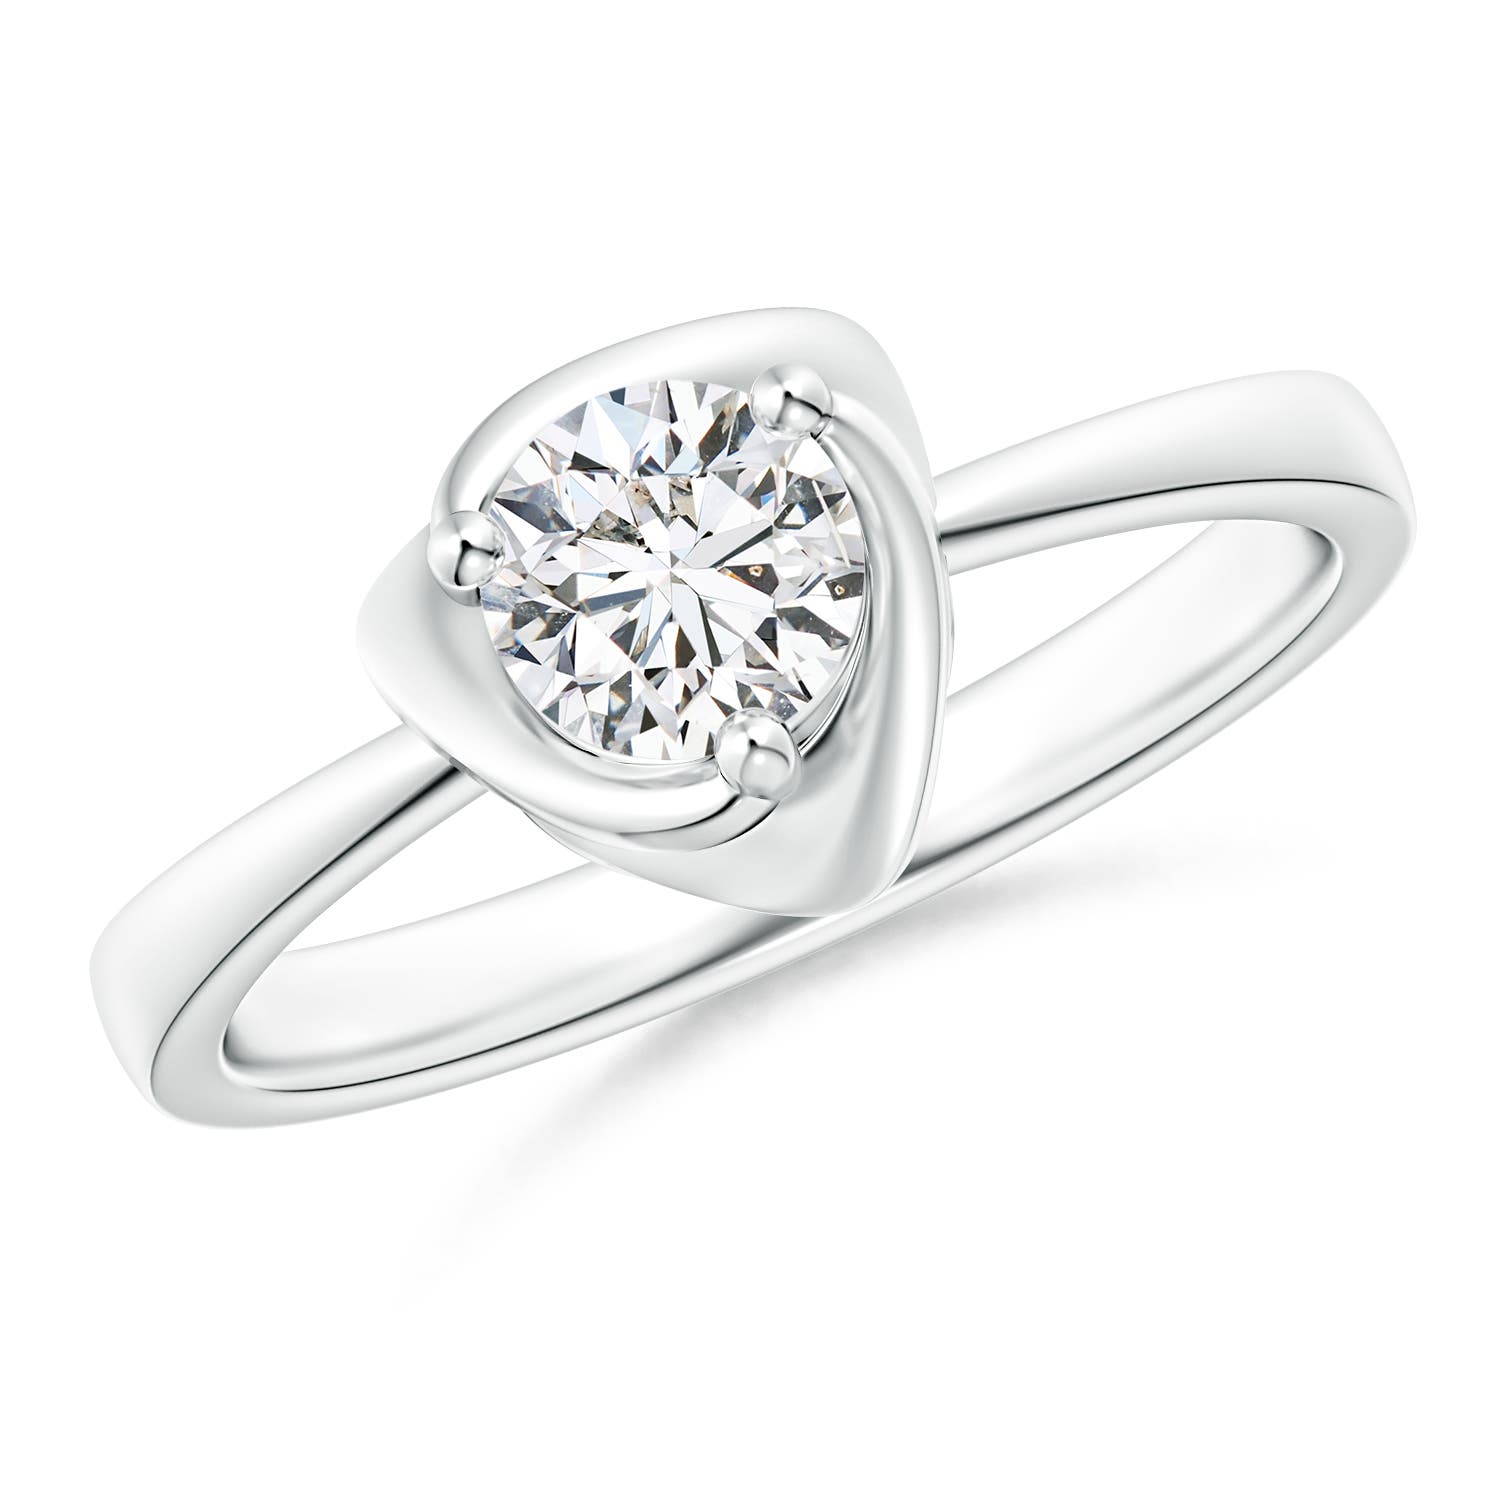 H, SI2 / 0.5 CT / 14 KT White Gold